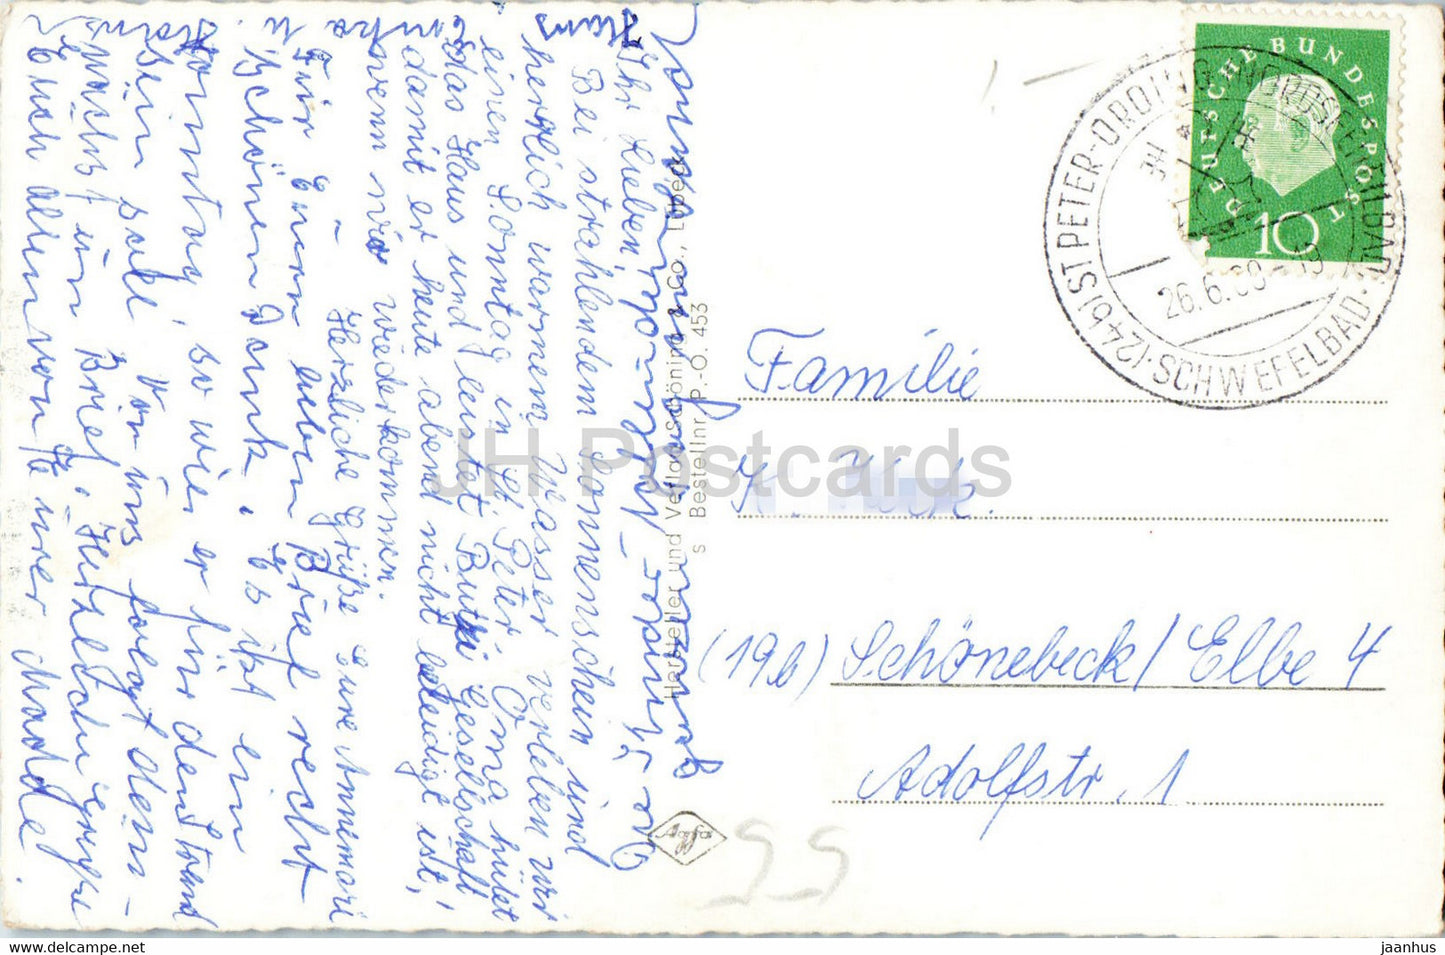 Nordseeheilbad und Schwefelbad St Peter Ording - Strand - Camping - Leuchtturm - lighthouse - 1960 - Germany - used